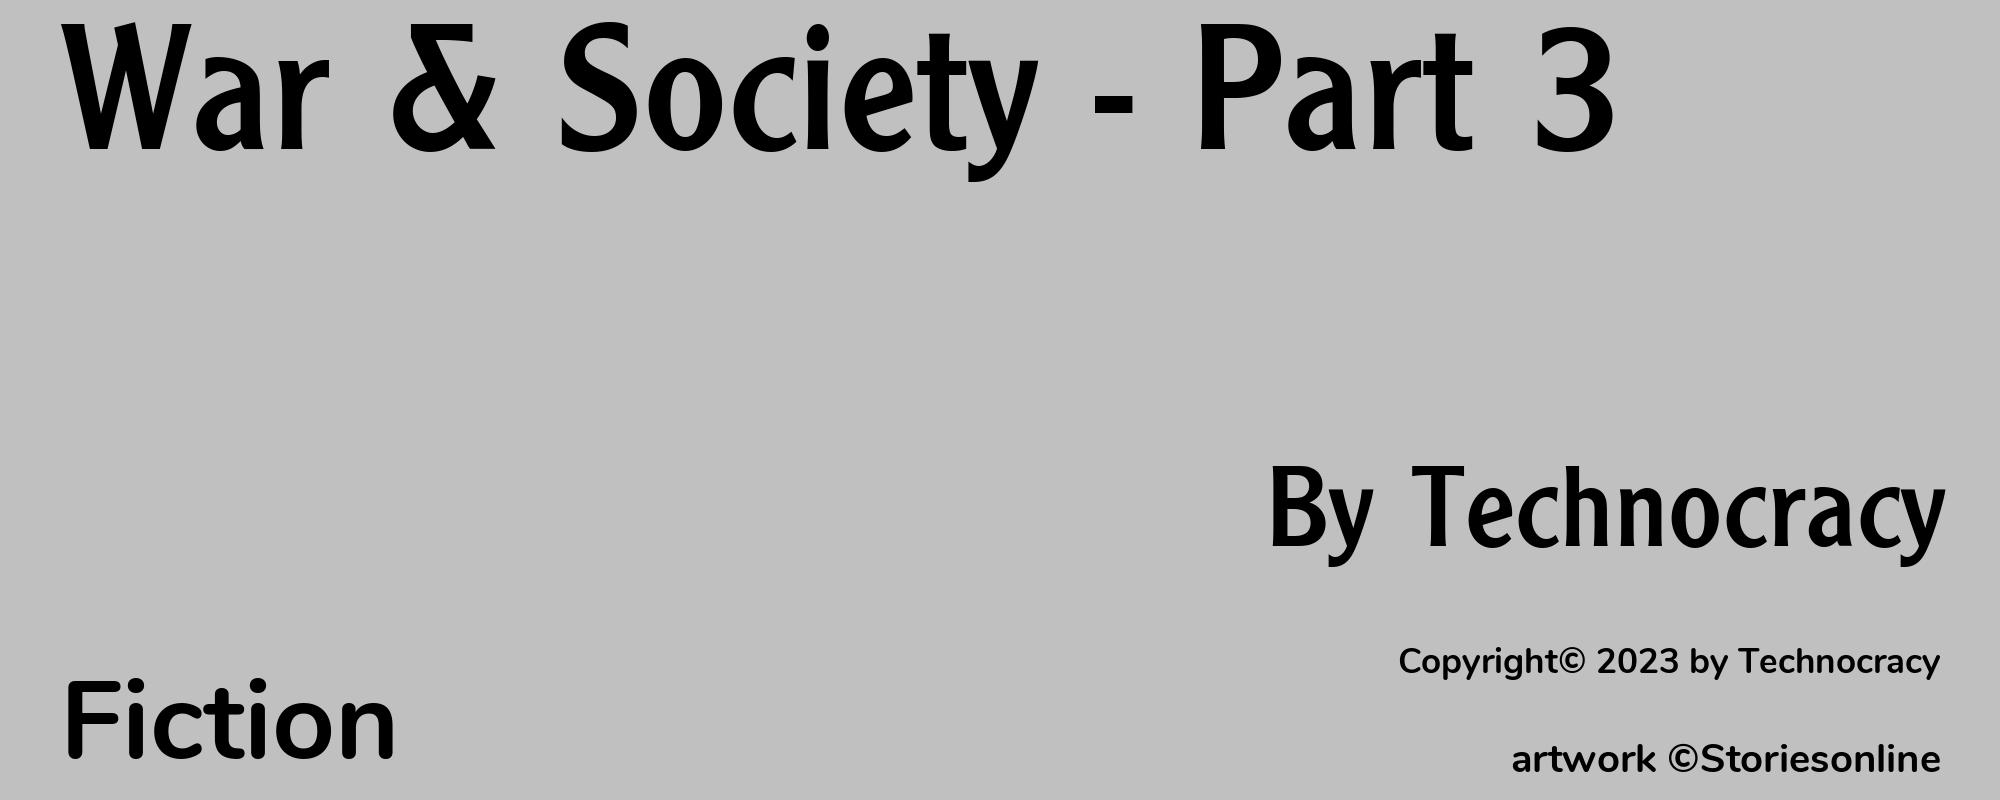 War & Society - Part 3 - Cover